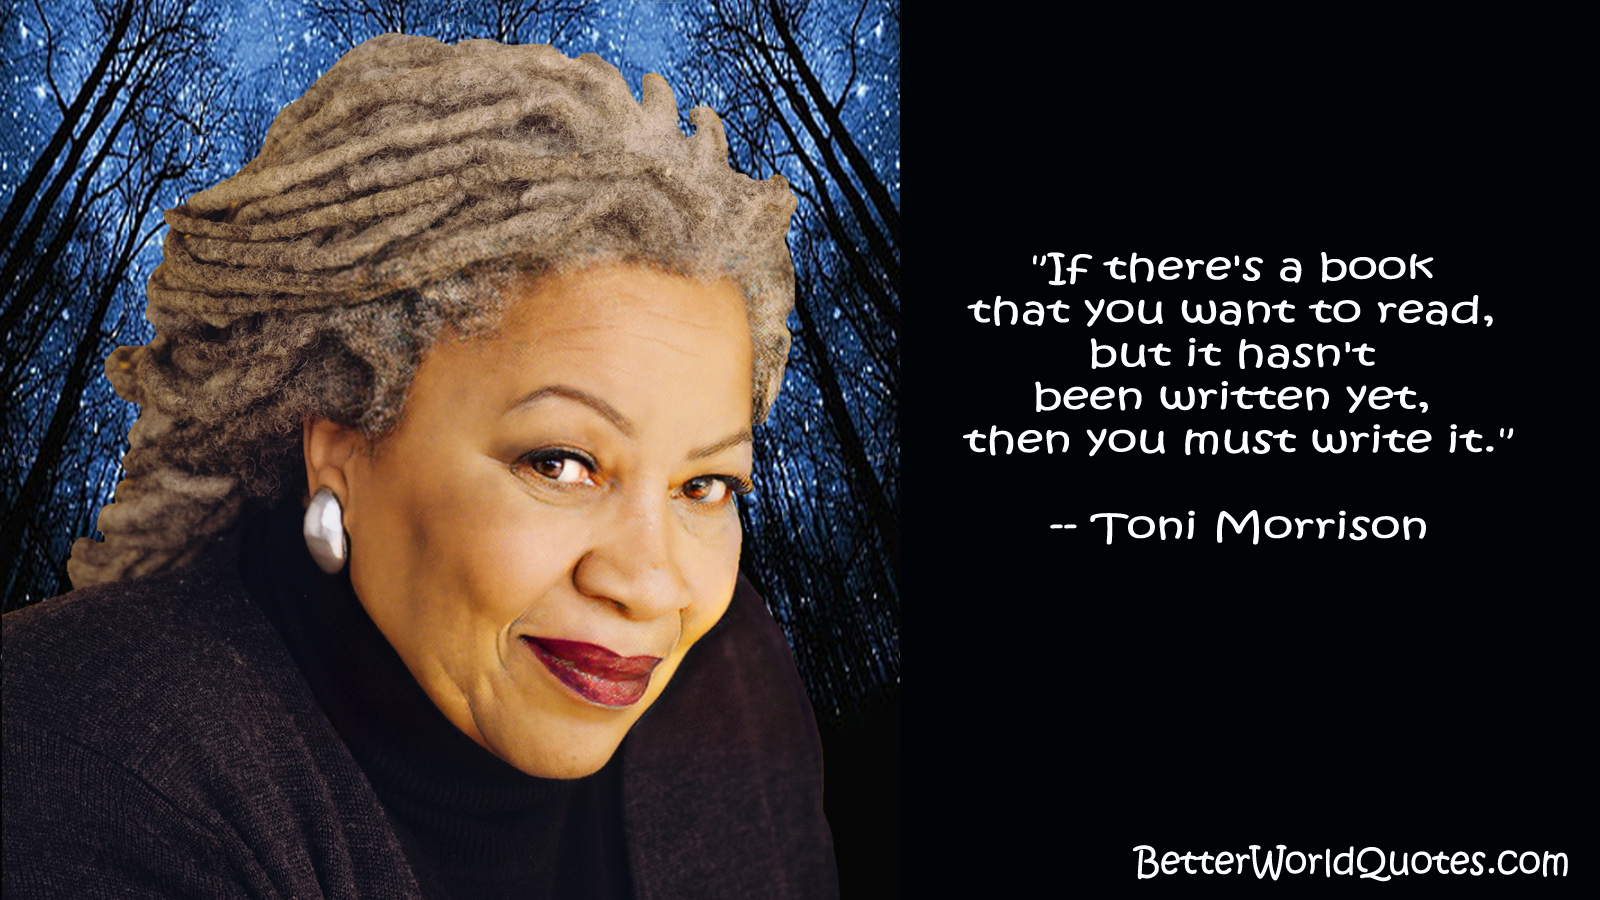 Toni Morrison: If there's a book that you want to read, but it hasn't been written yet, then you must write it.